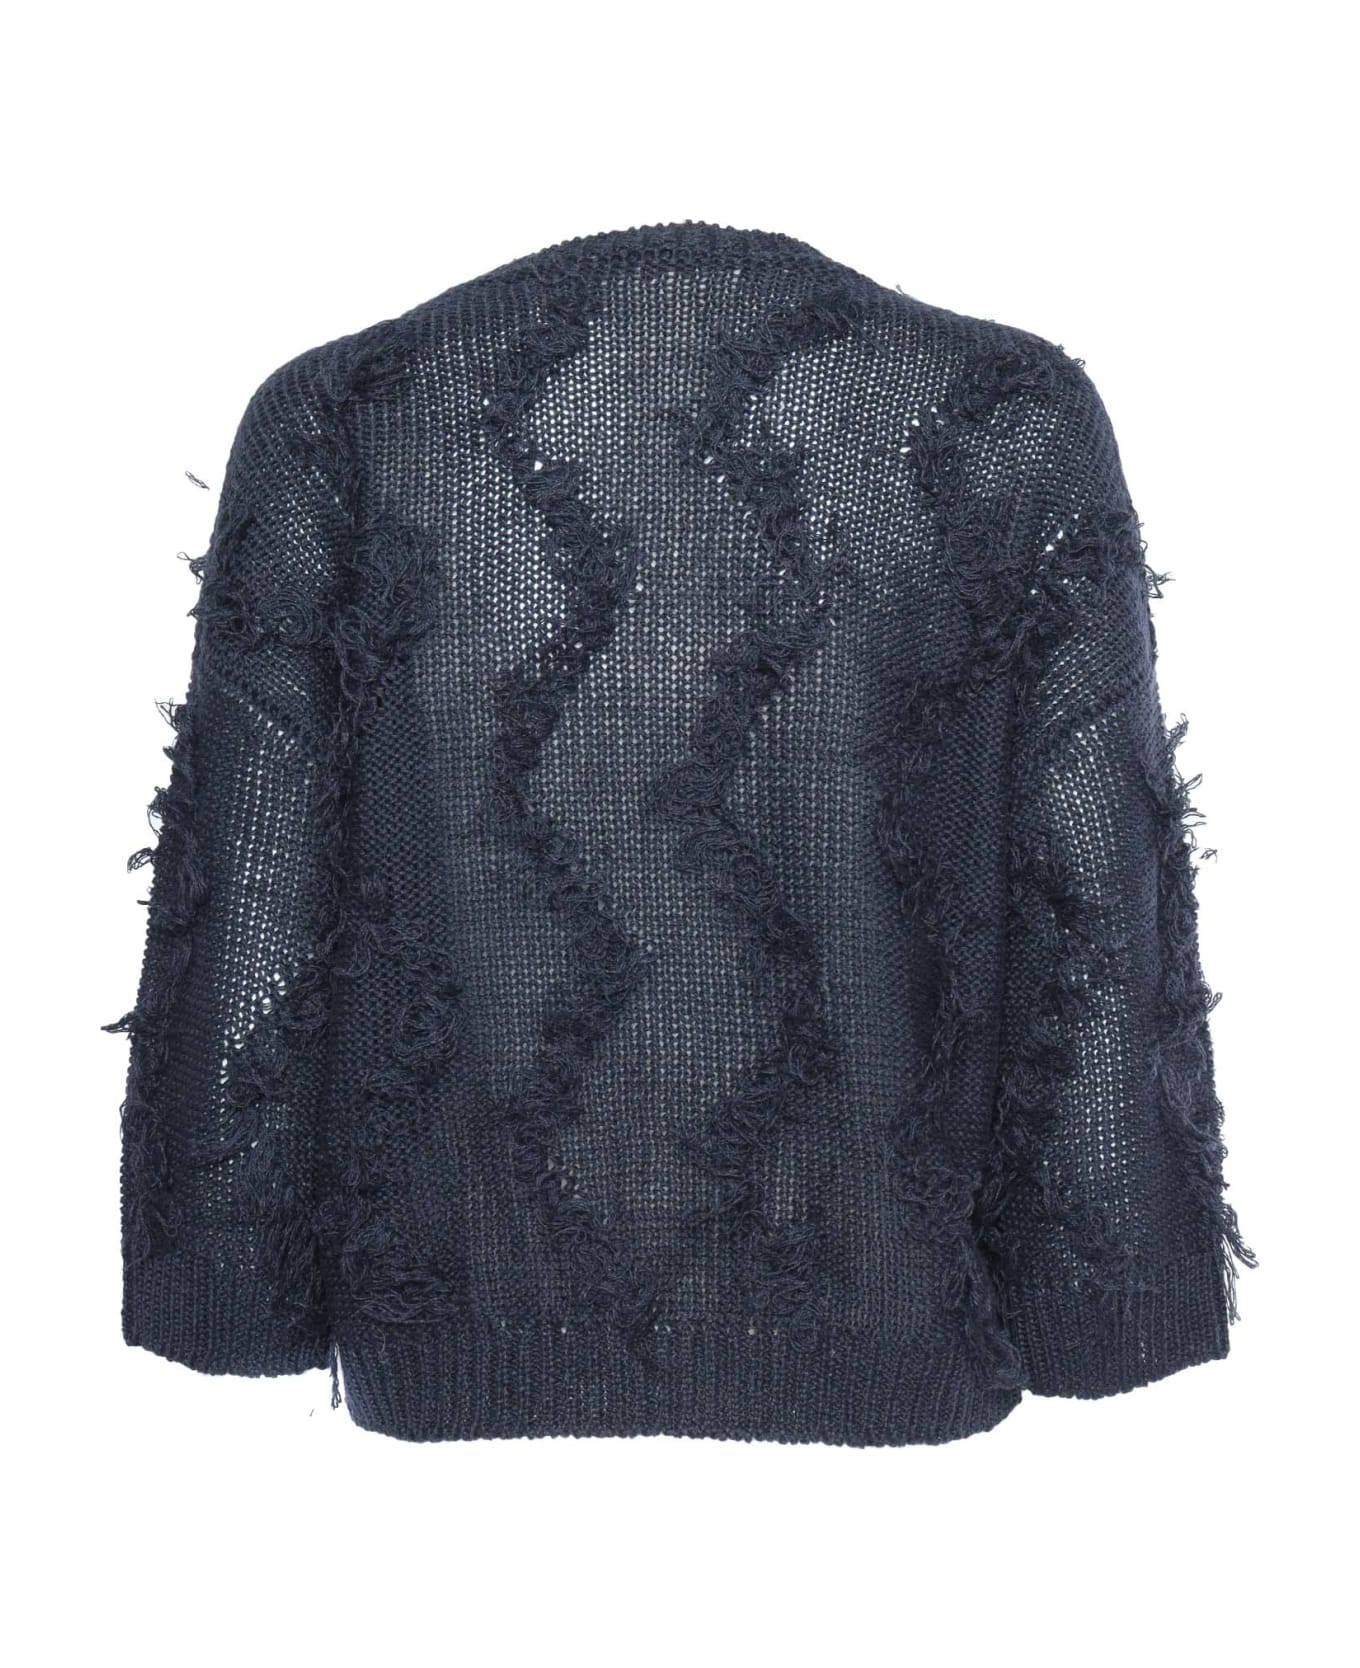 Peserico Black Tricot Sweater With Fringes - BLACK